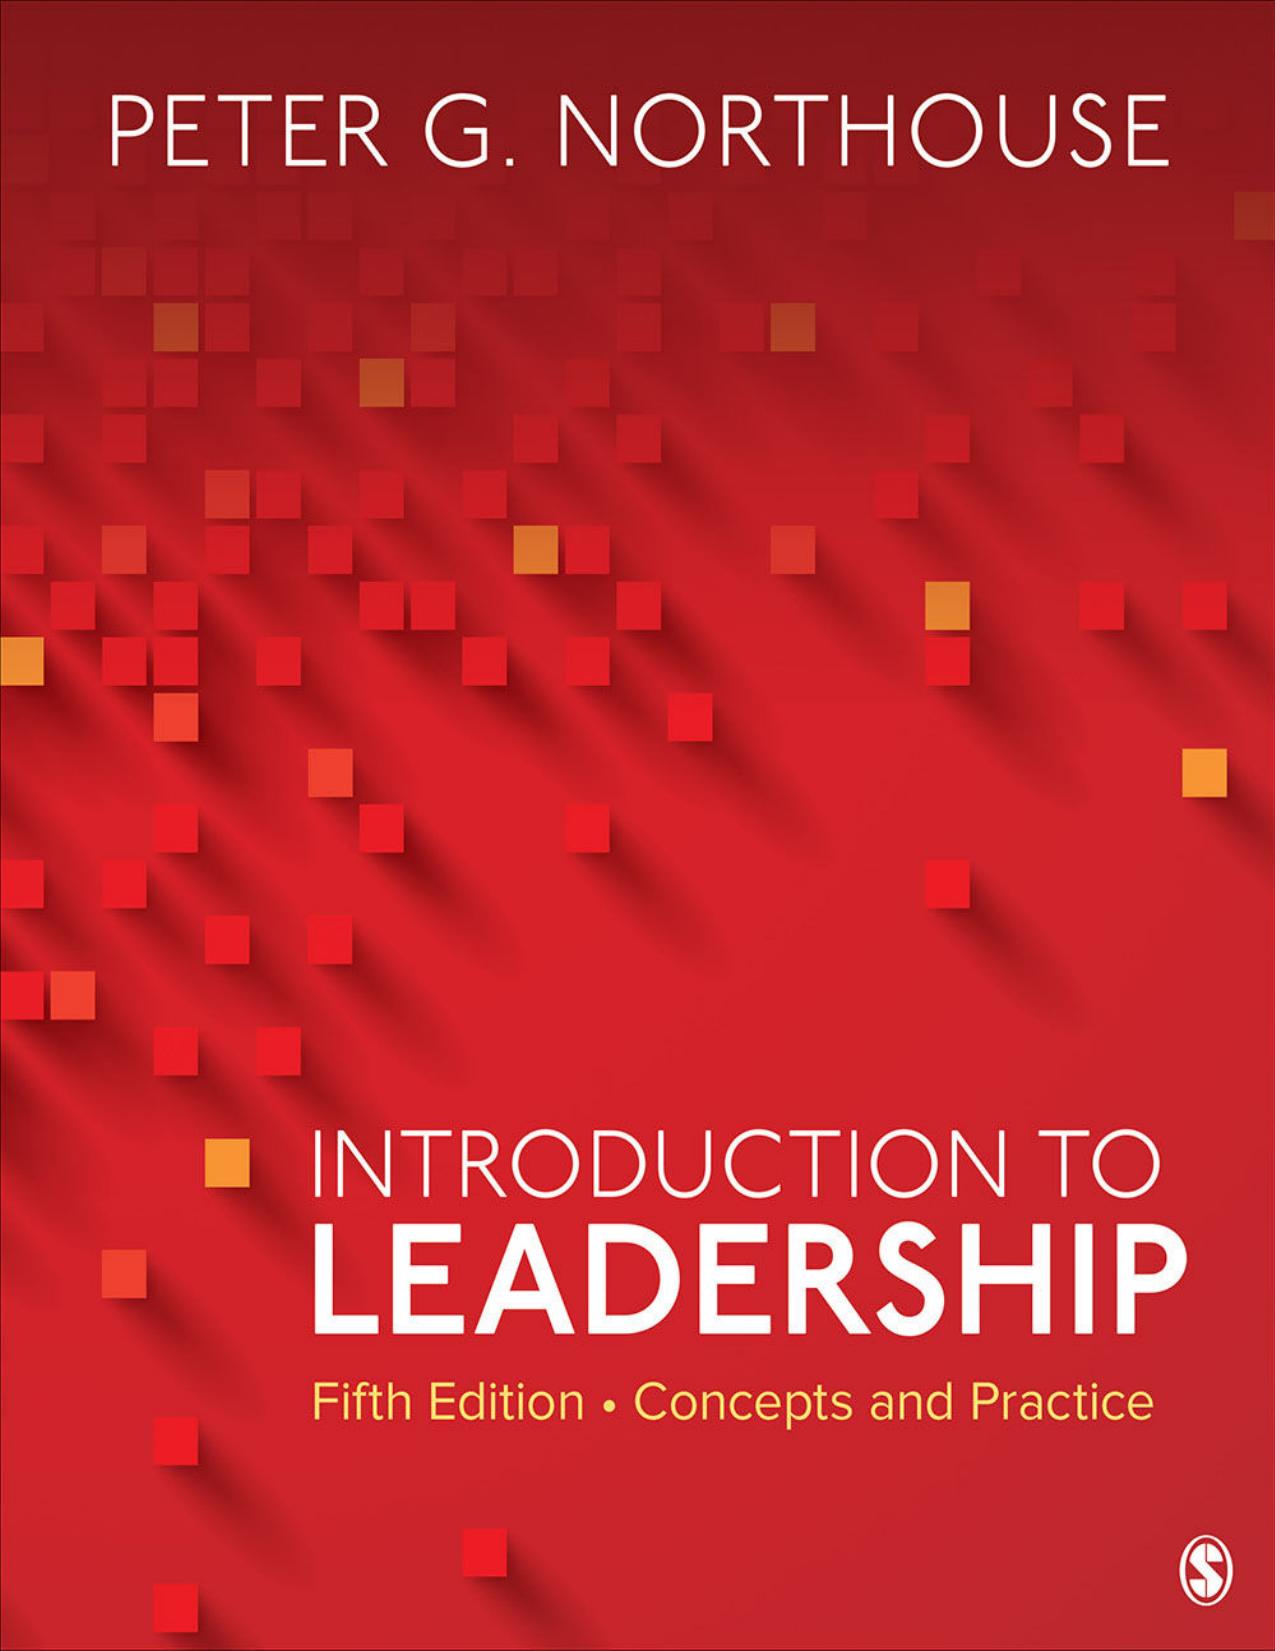 (eBook PDF)Introduction to Leadership Concepts and Practice 5th Edition by Peter G. Northouse